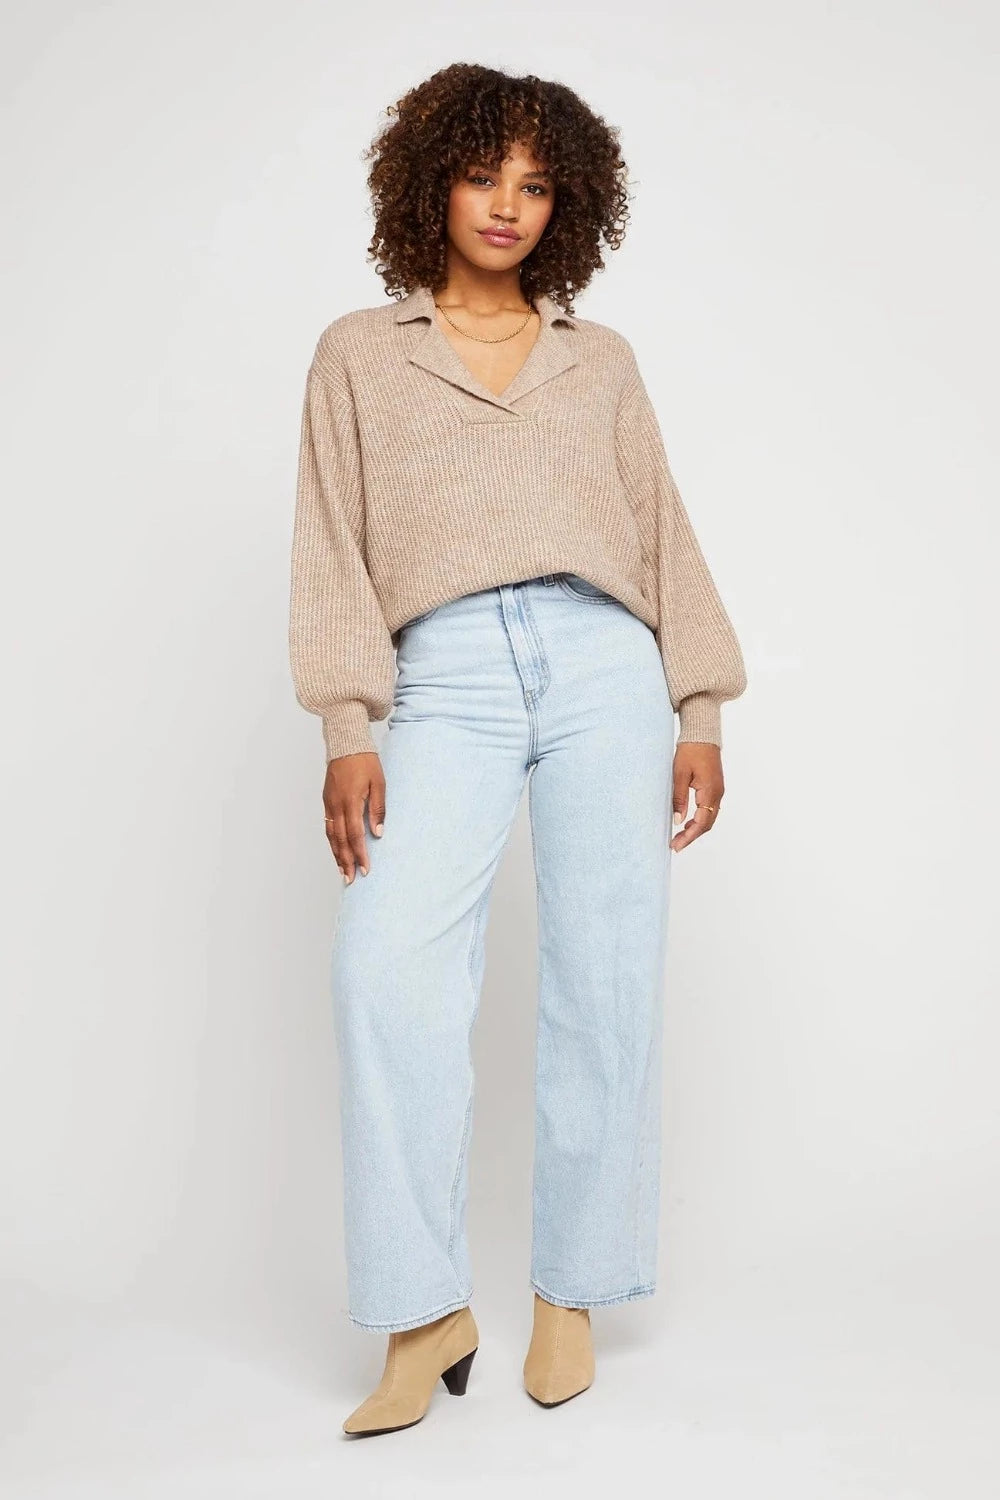 Gentle Fawn Astoria Pullover